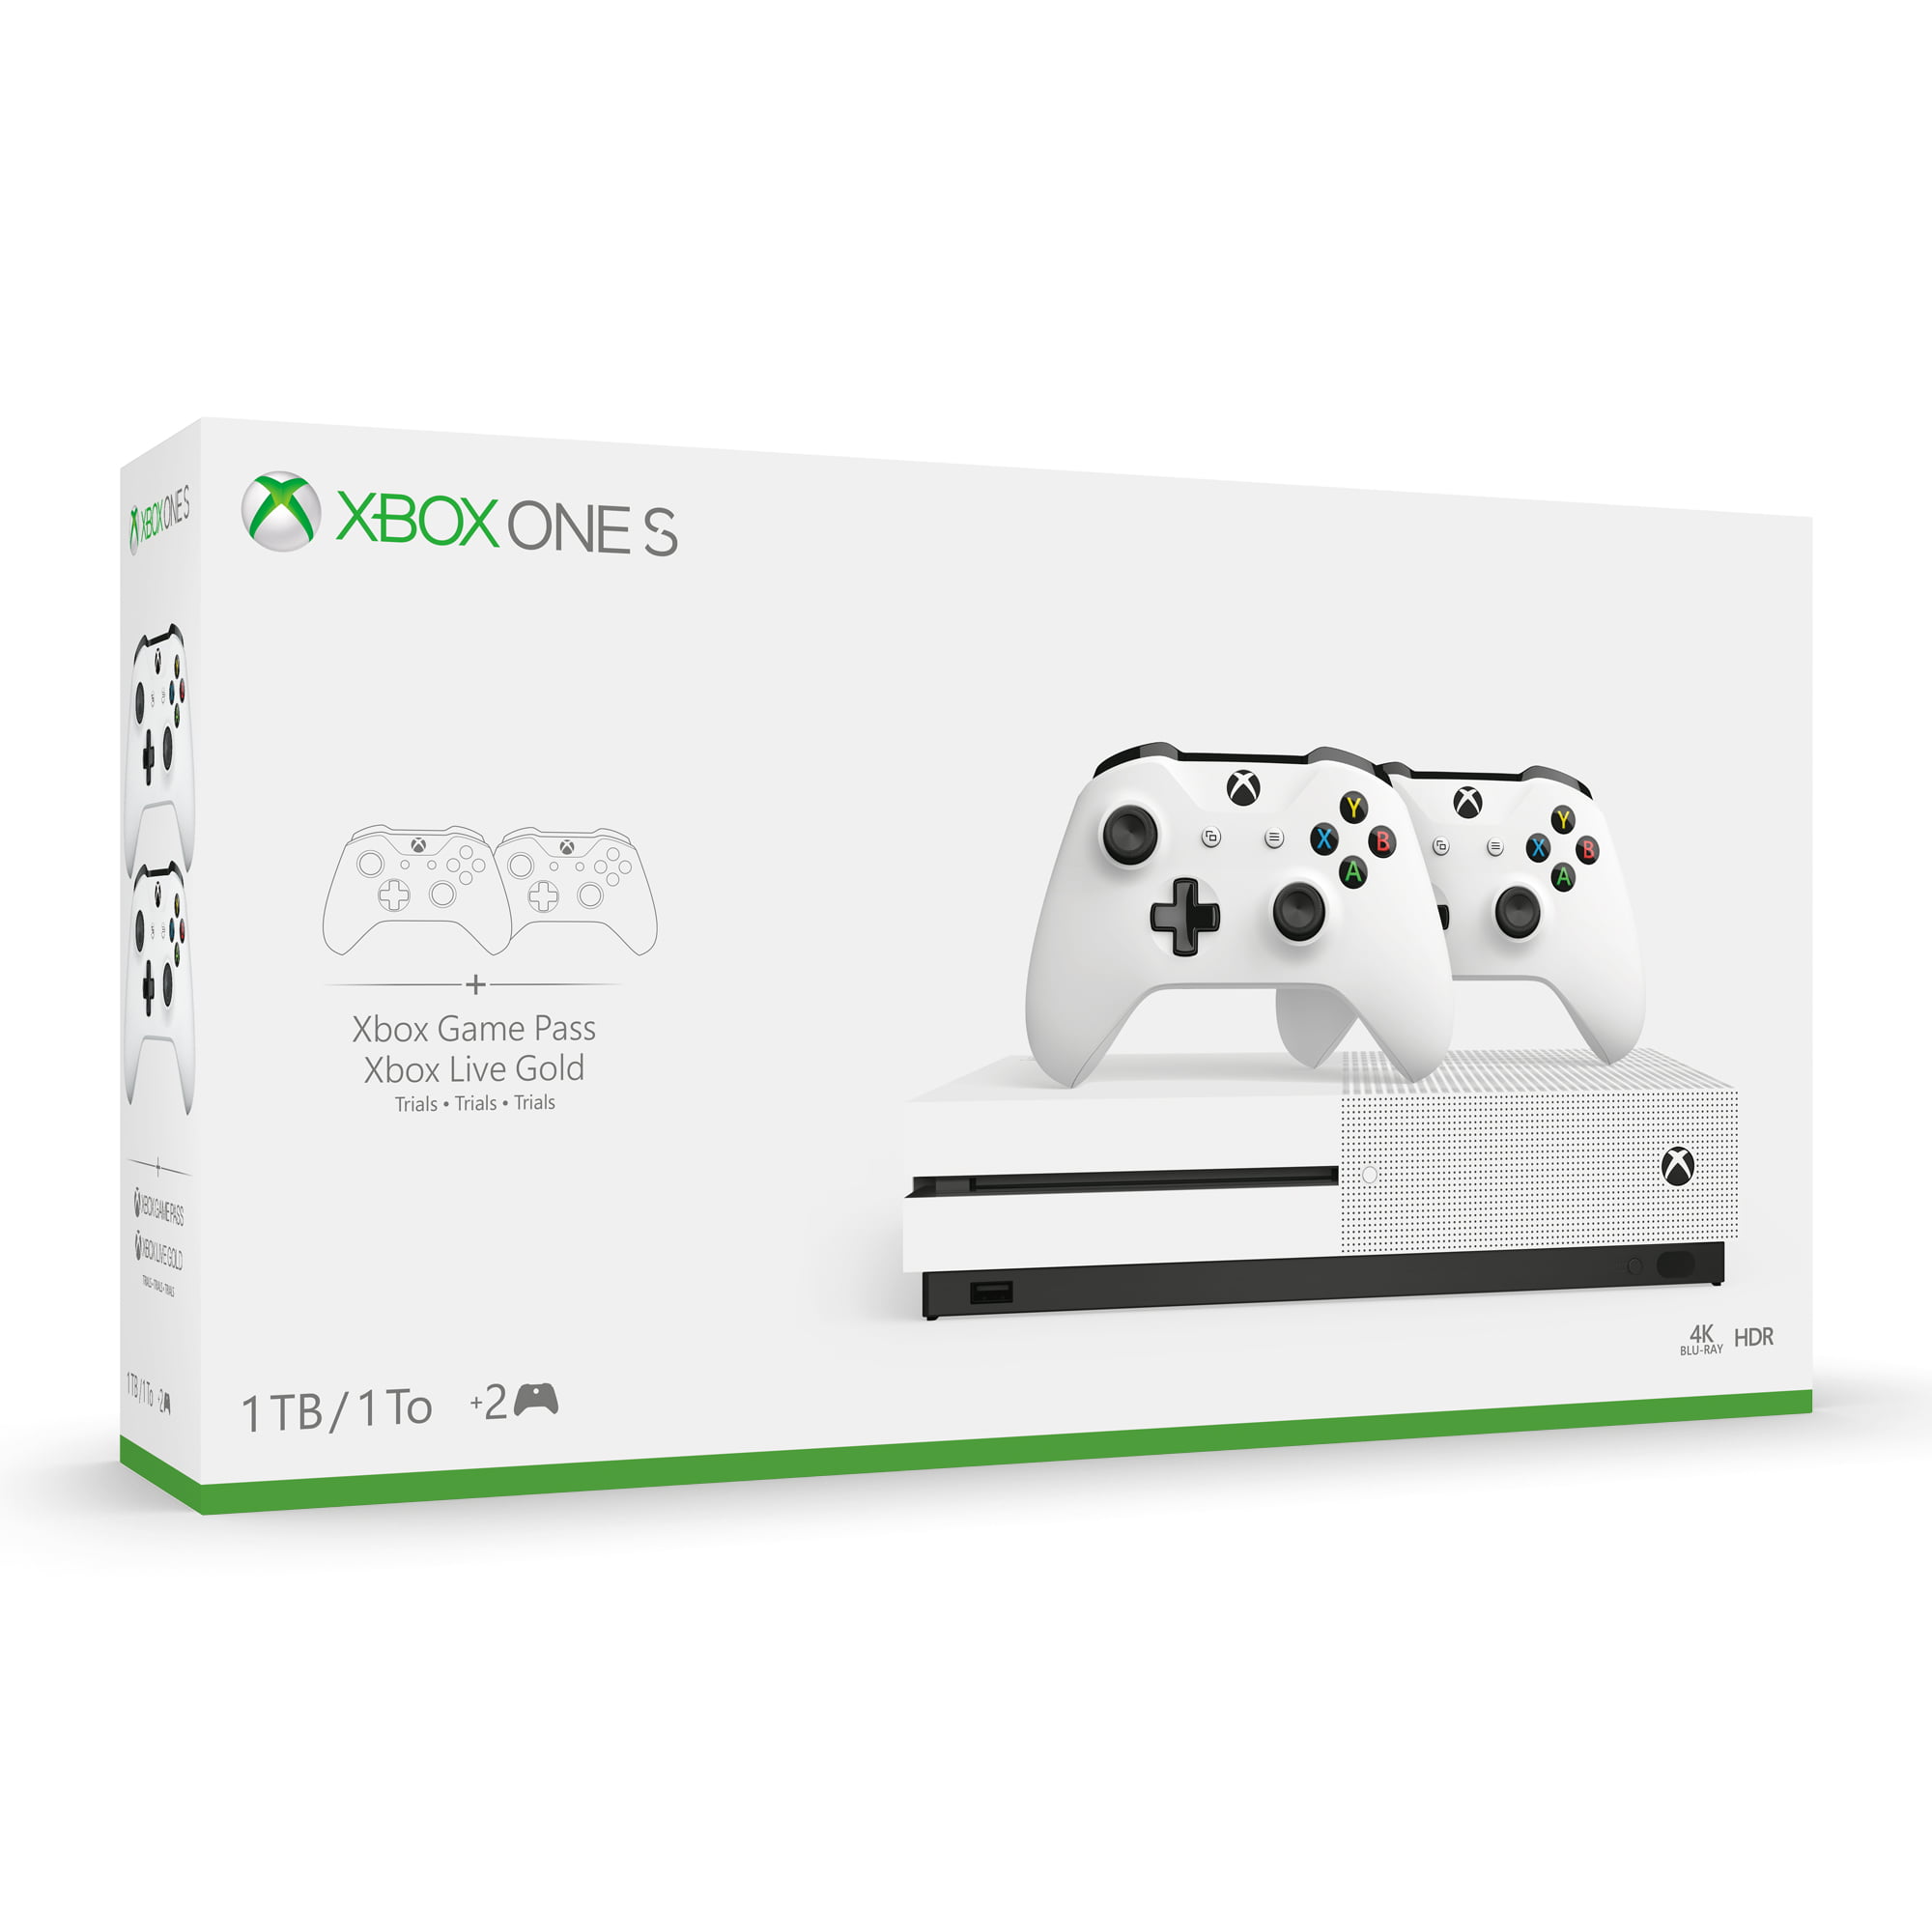 Xbox One S 1tb Bundle With 2 Controllers And 1 Month Game Pass